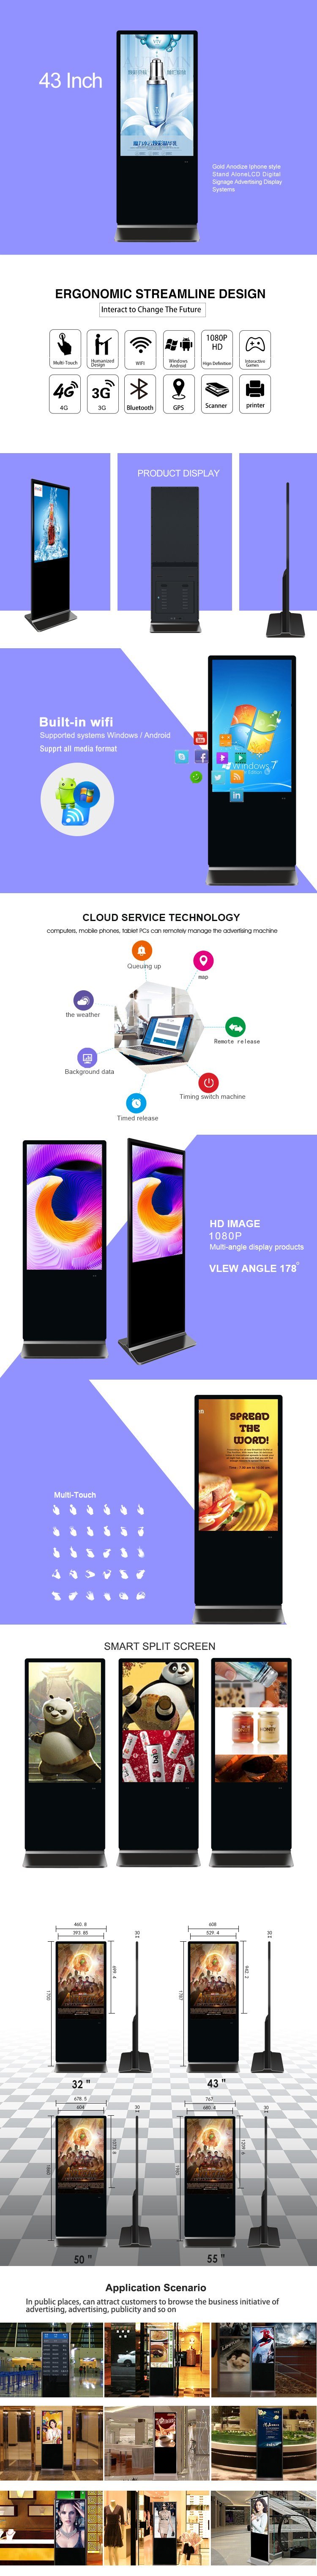 43inch Android Interactive Screen Digital Signage